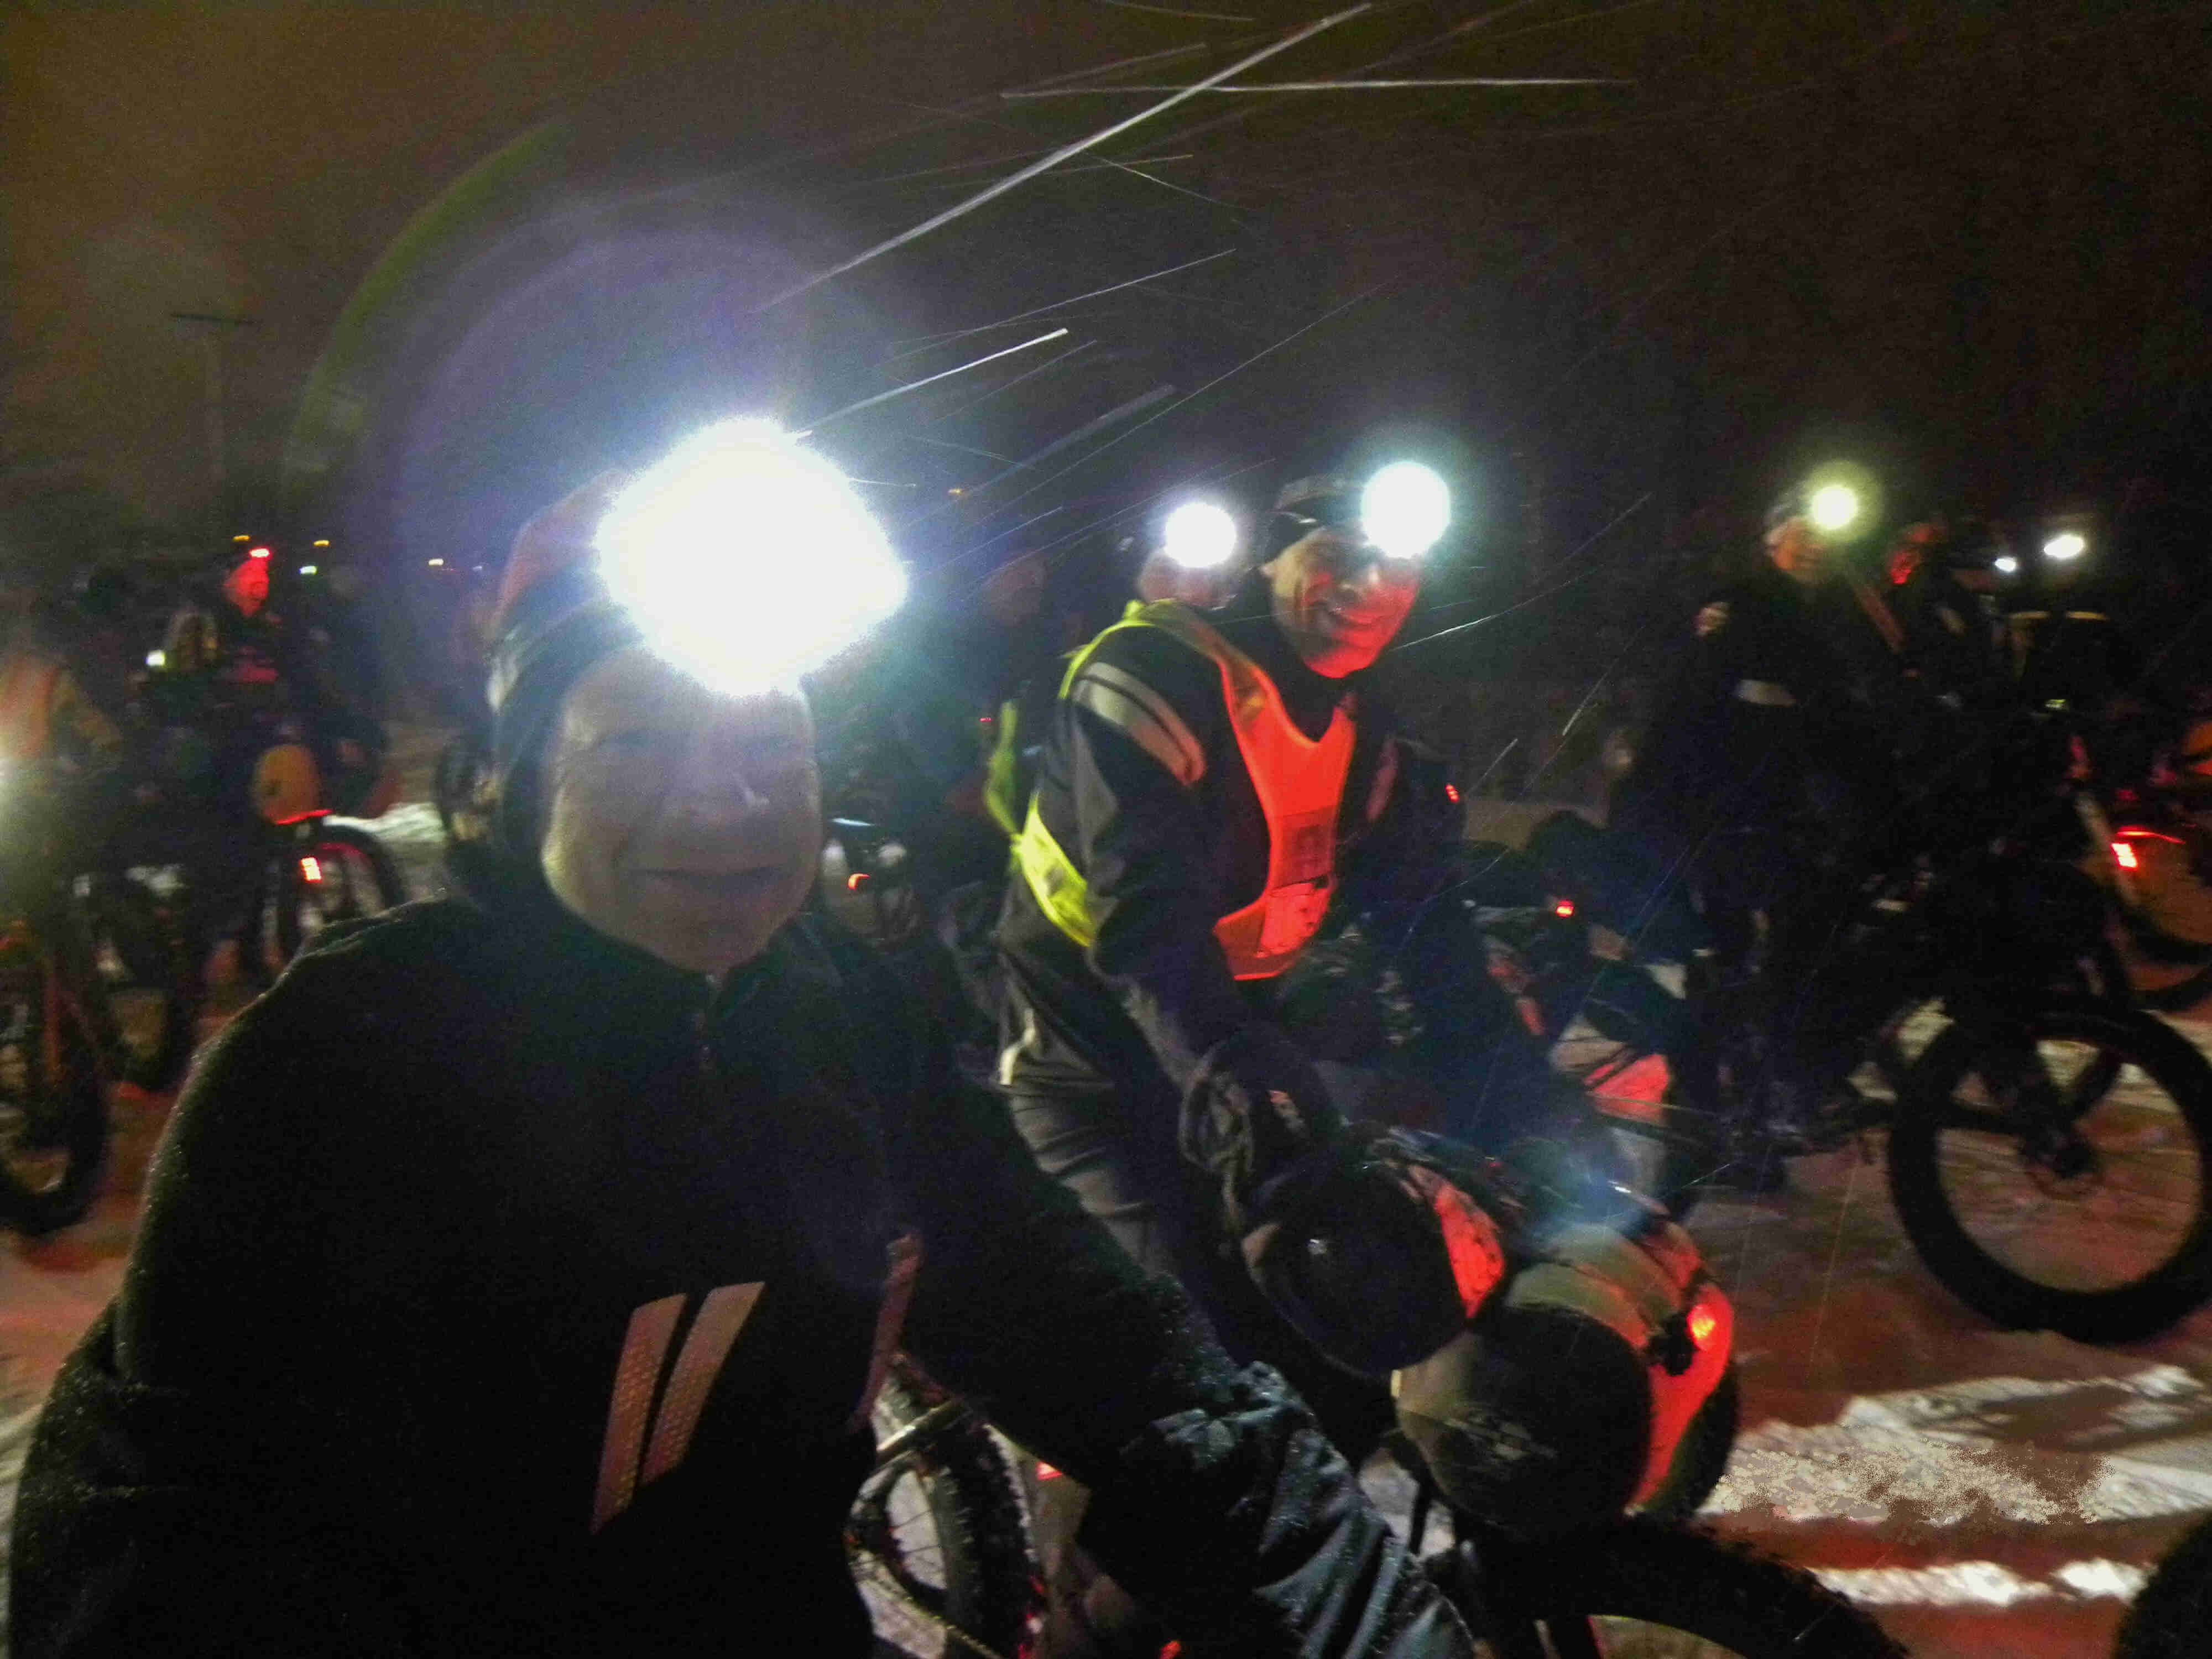 Side view of cyclists wearing winter outerwear and headlamps, lined up side by side on the bikes, at night in the snow